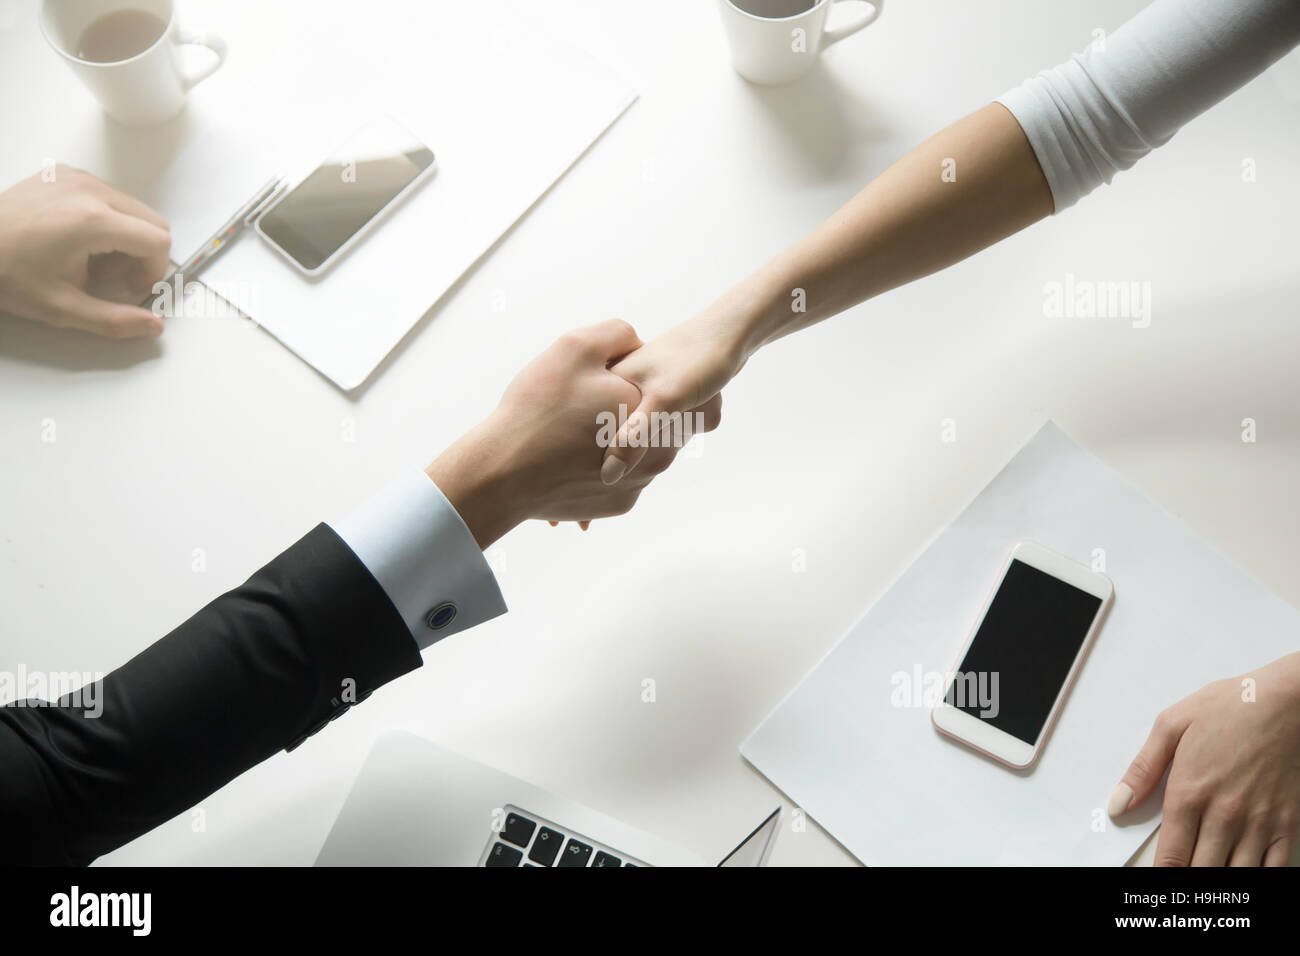 Top view of a handshake between man and woman Stock Photo